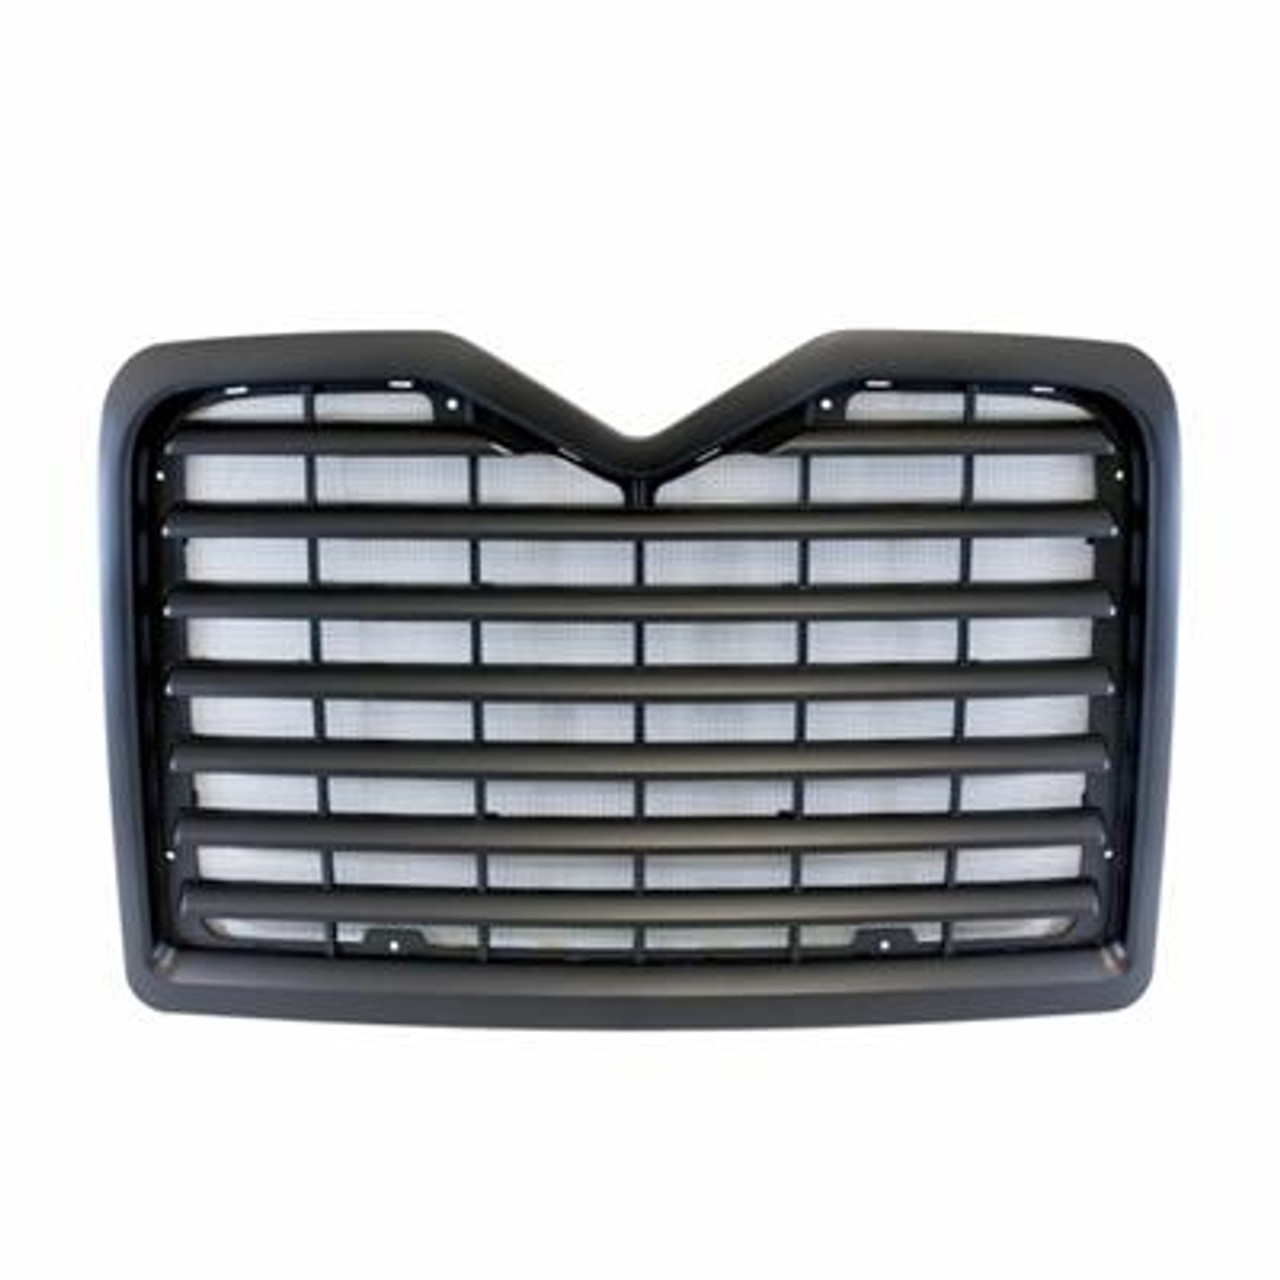 Black Grille With Bug Screen For Mack CX